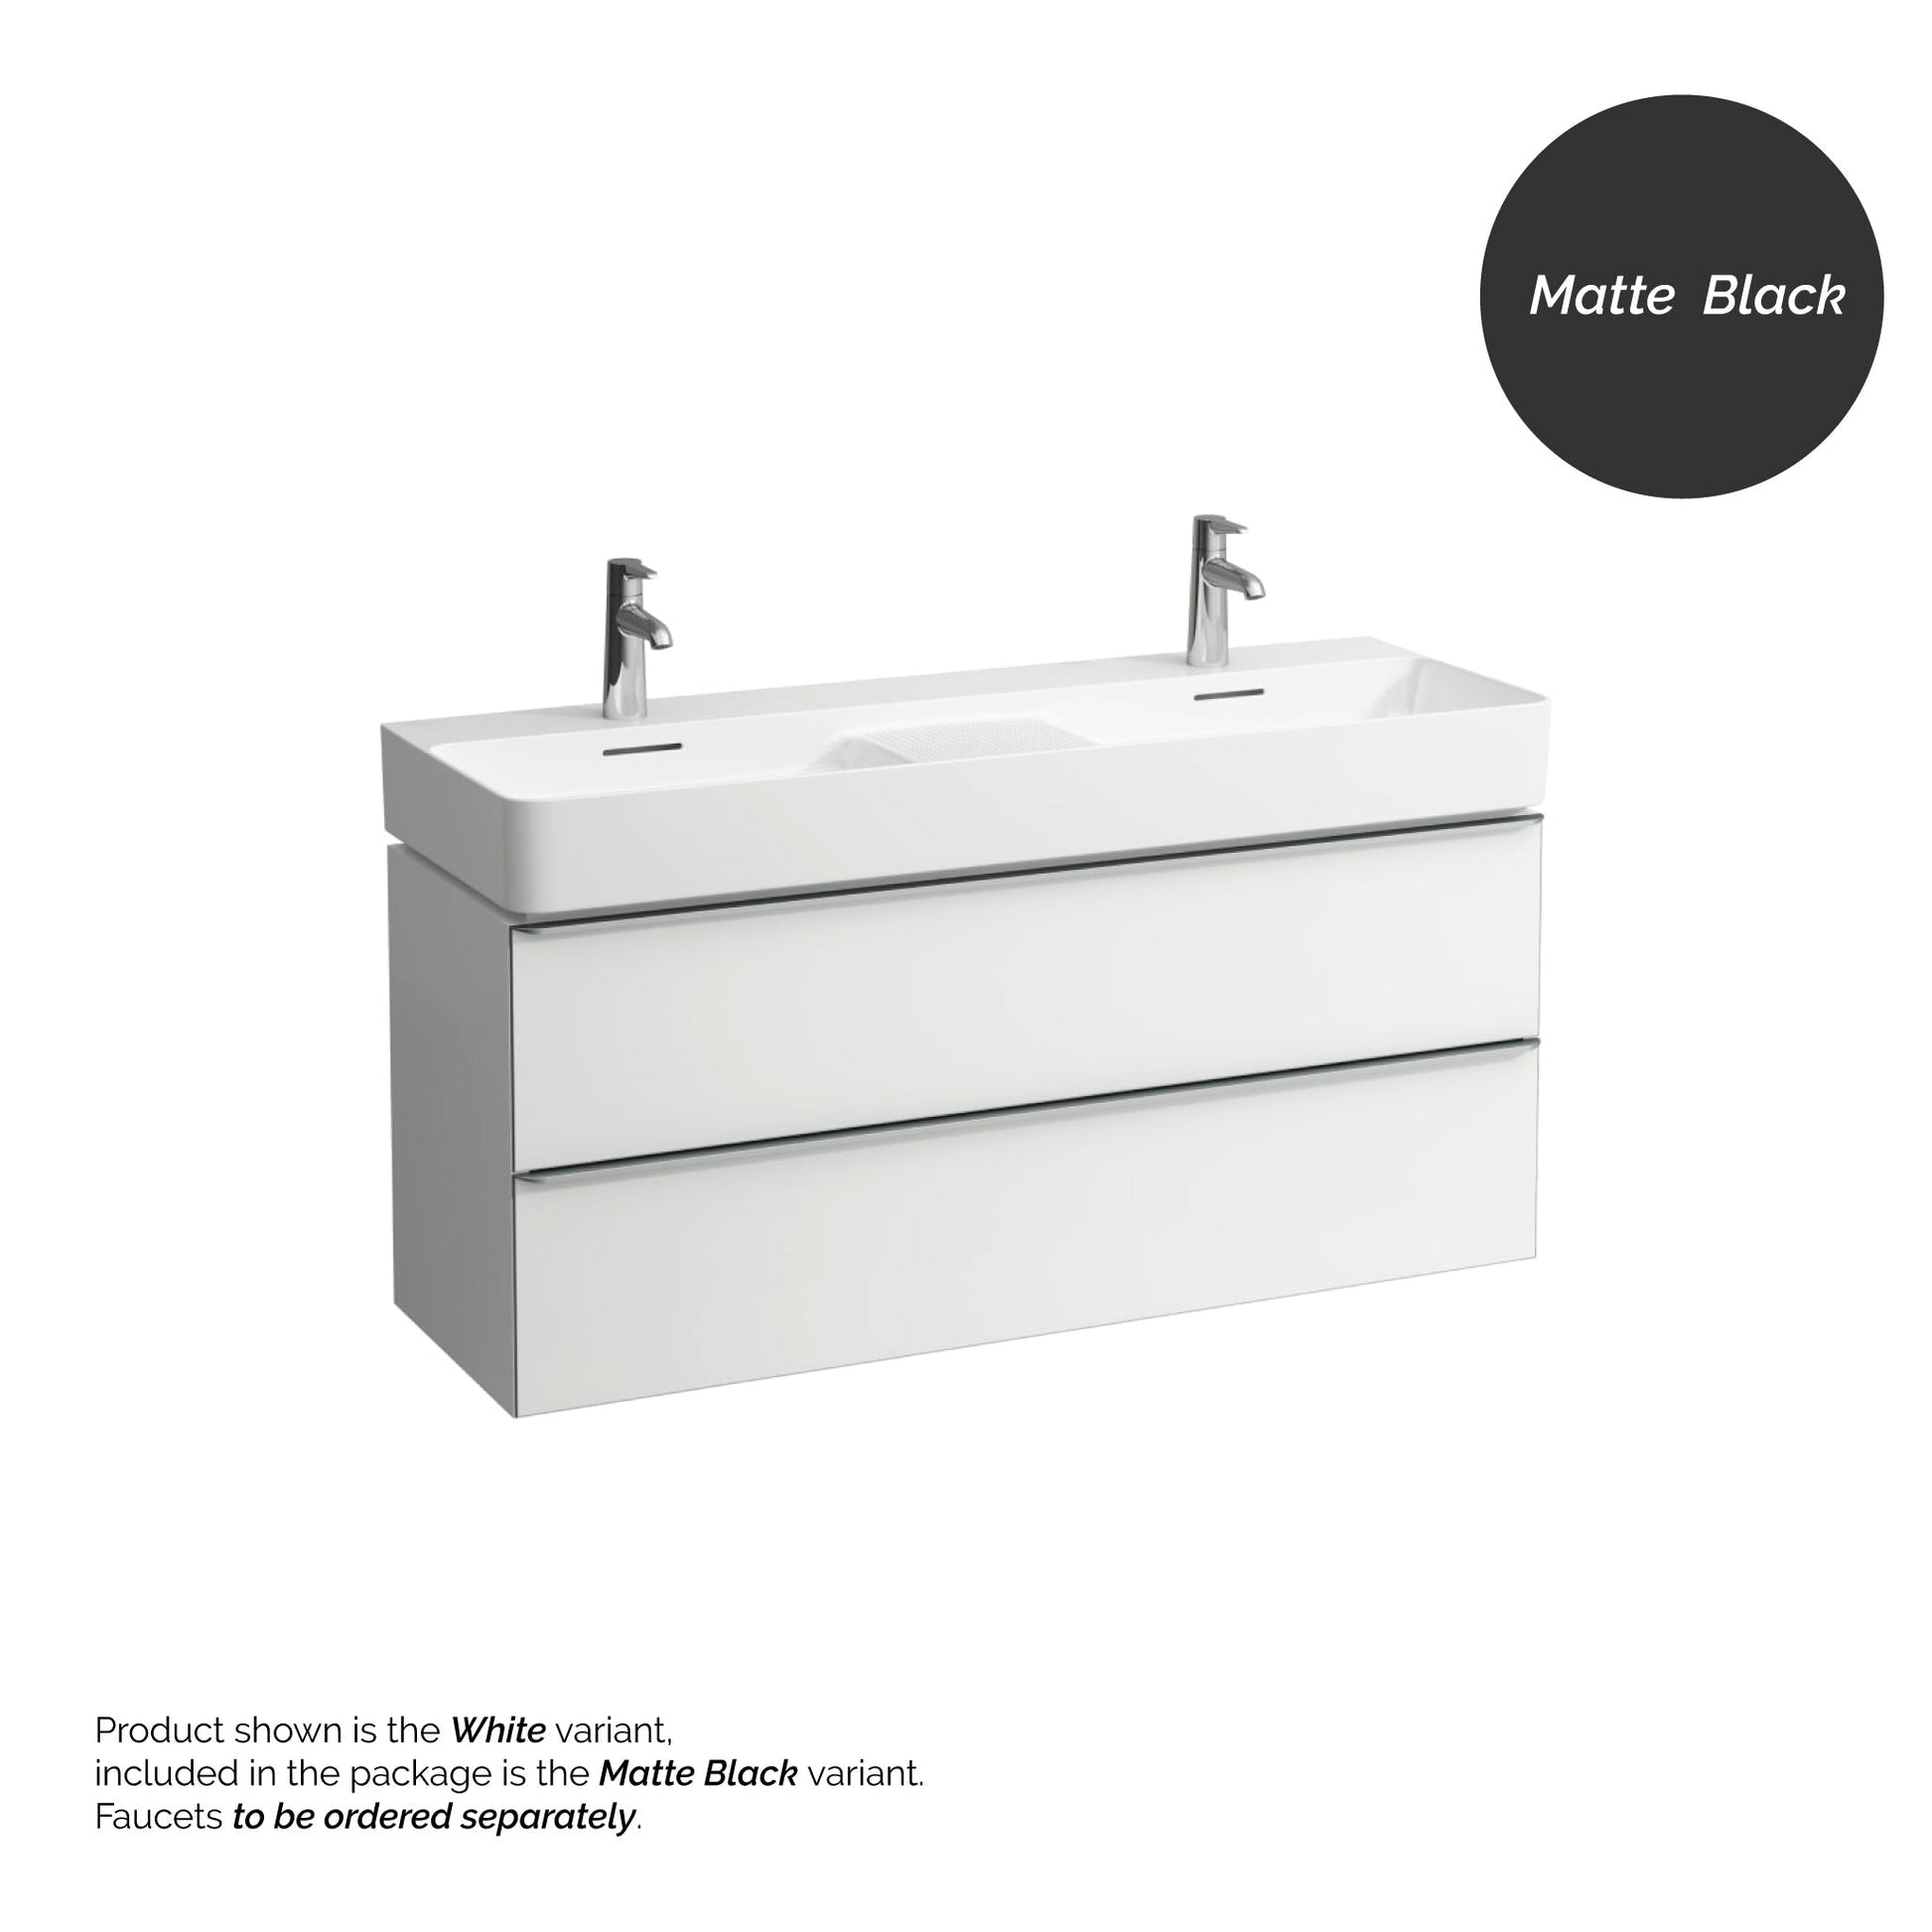 Laufen Val 47" x 17" Matte Black Ceramic Wall-Mounted Double Bathroom Sink With 2 Faucet Holes